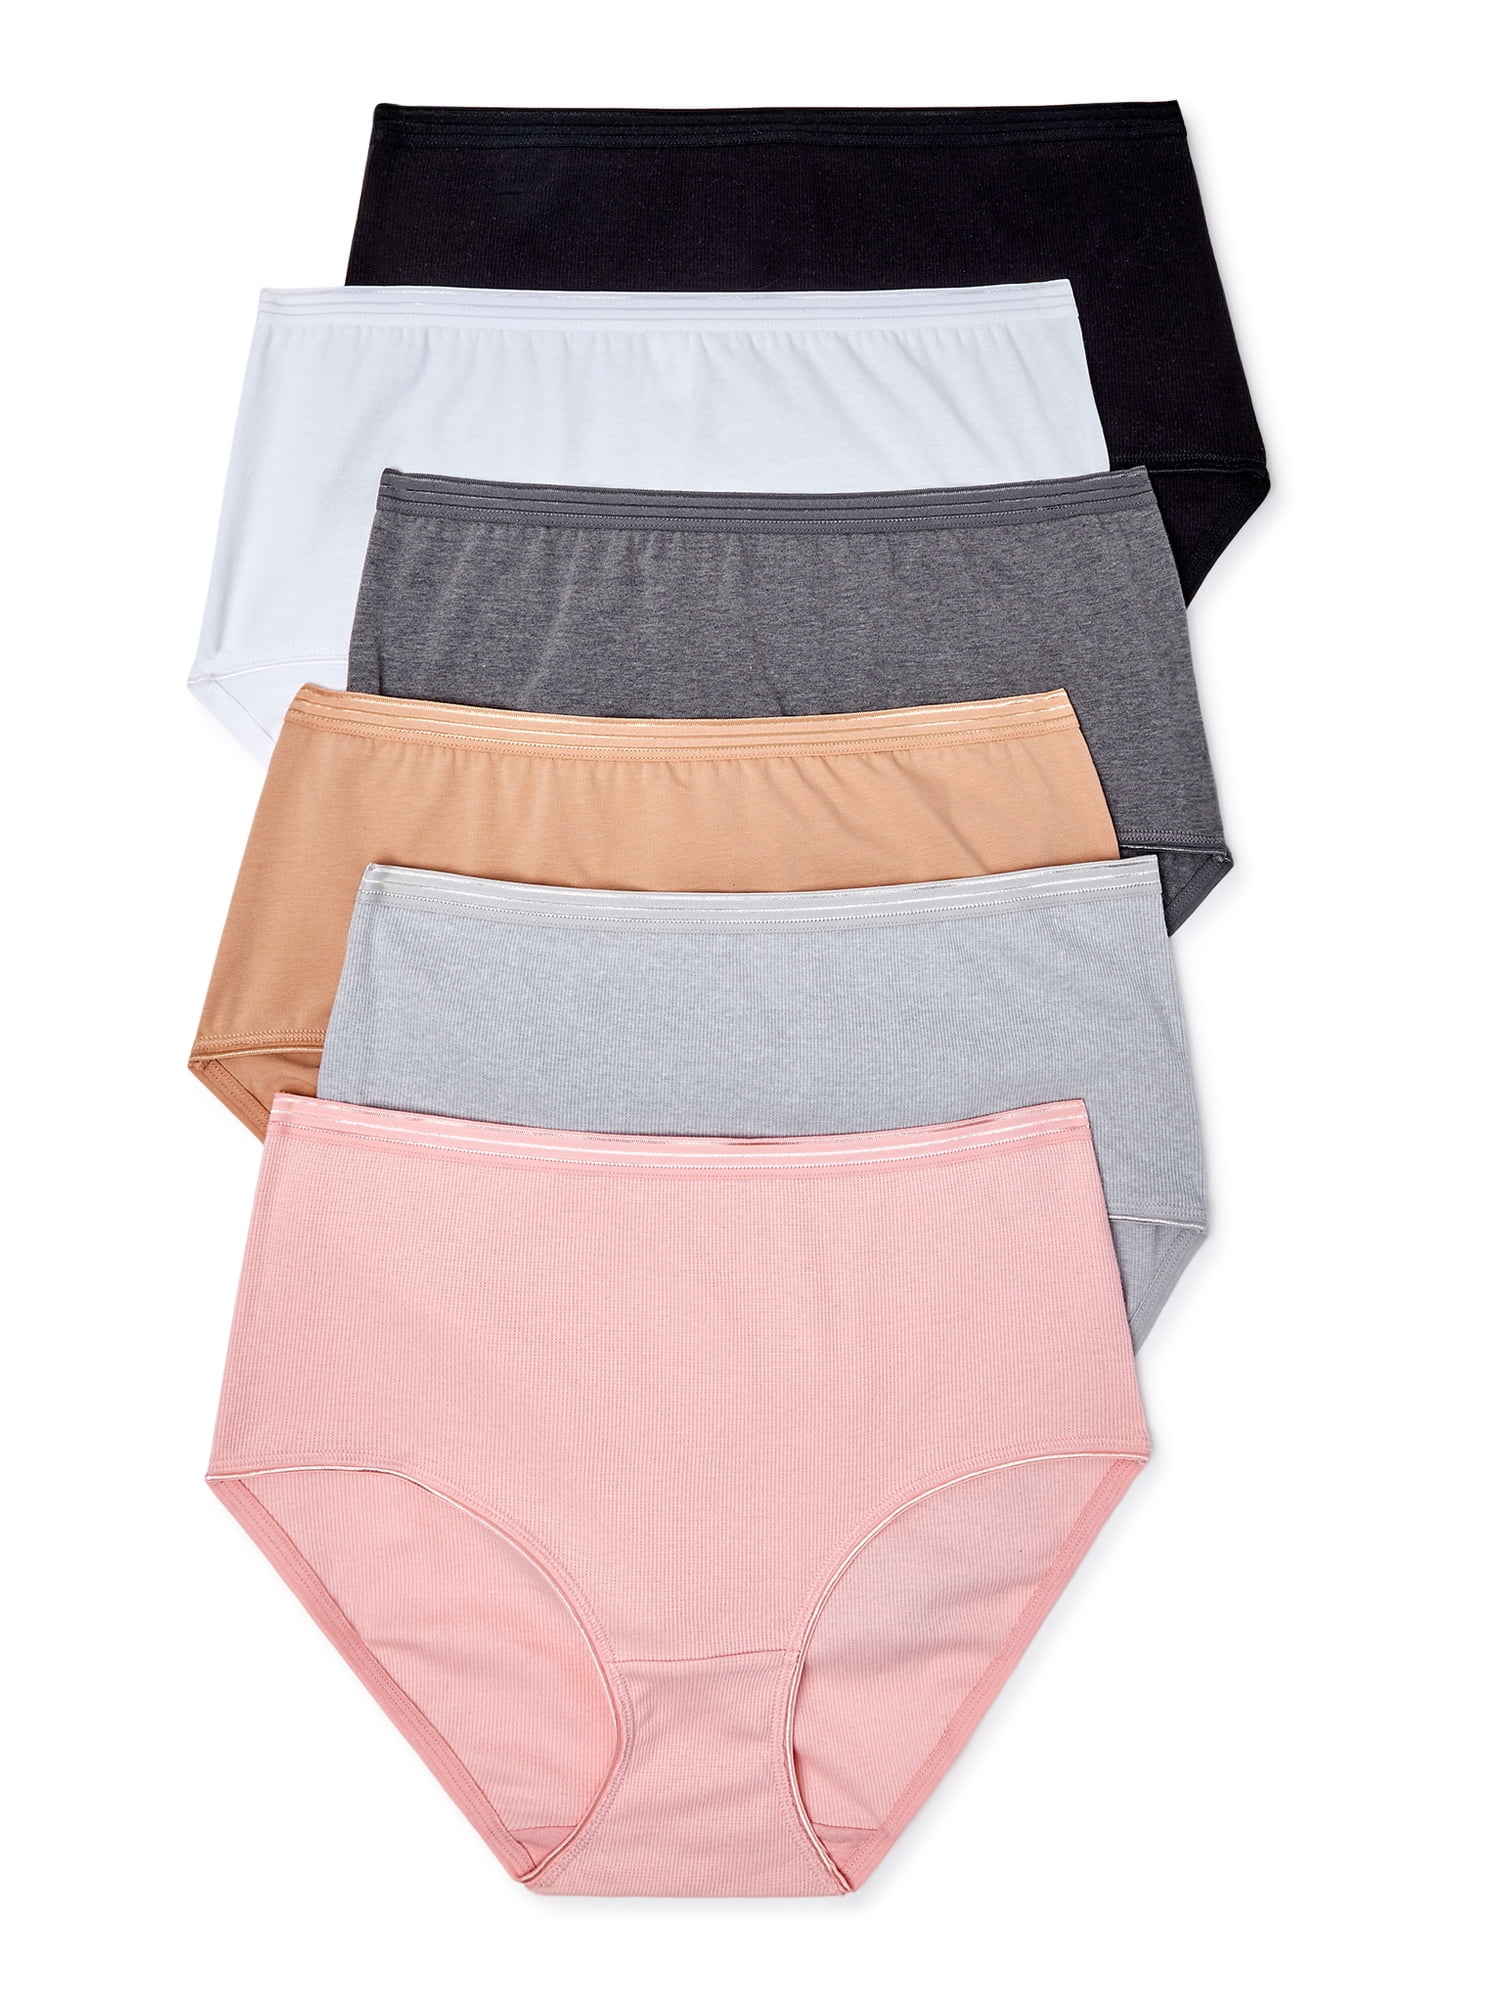 Women's Hidden Pocket Panties Travel Underwear 3/6 Packs Seamless Boxers  Brief Anti Pickpocket Undergarments (Color : 3-Packs, Size : Large) at   Women's Clothing store